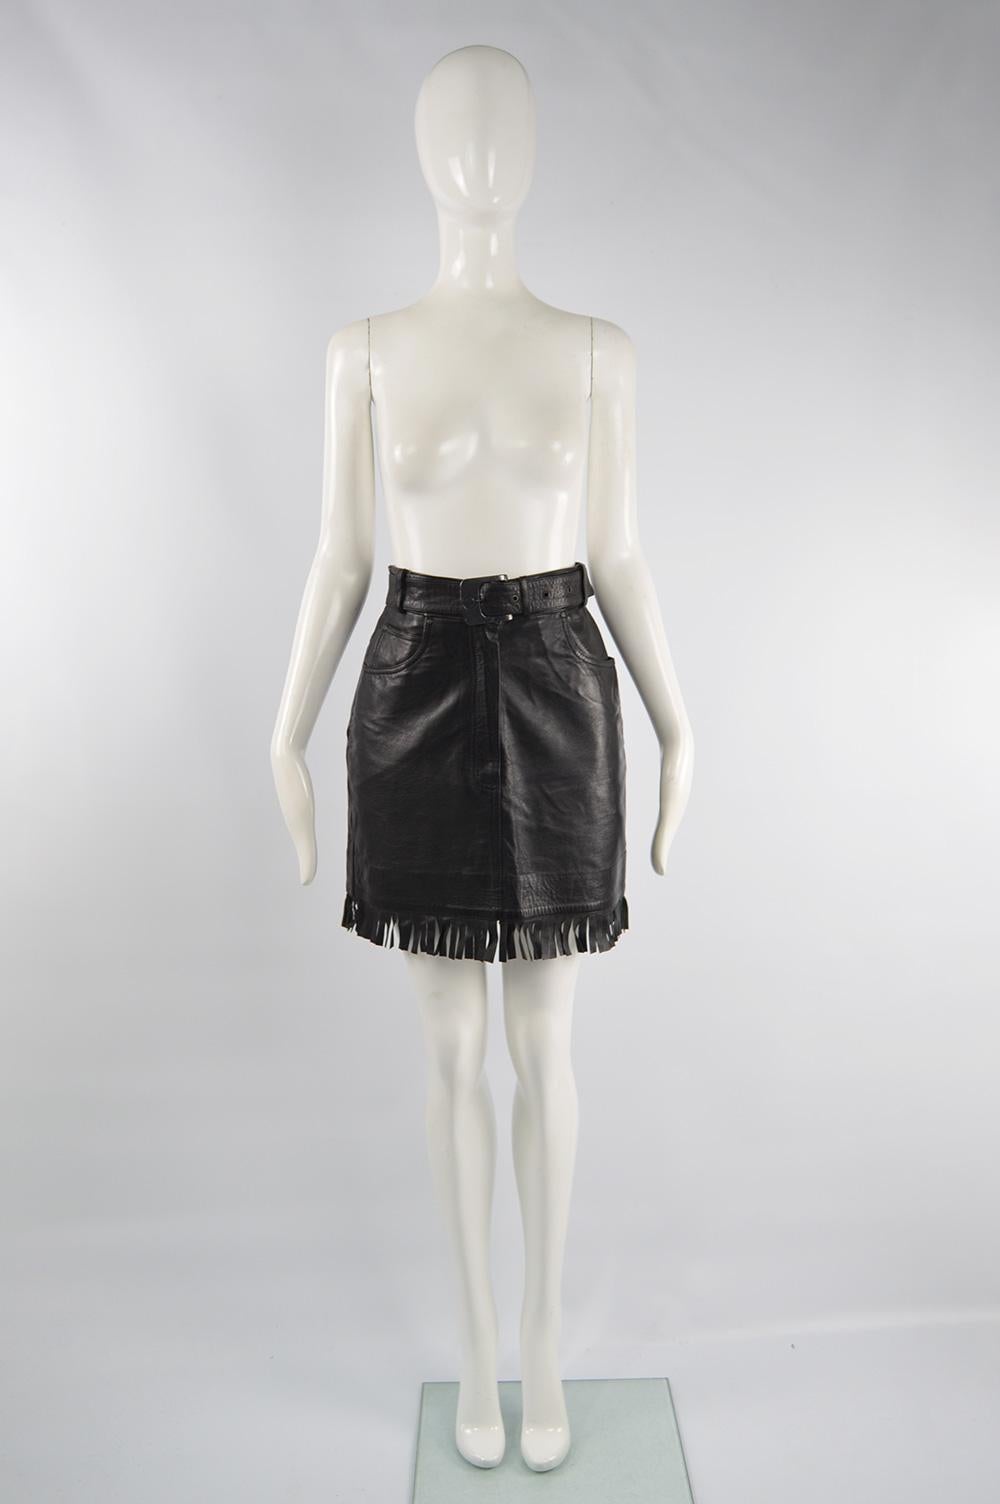 A fabulous vintage Claude Montana mini skirt from the early 90s. In a black genuine leather with fringes along the bottom and a matching western style belt. Perfect for a party. 

Size: Marked vintage 40 but fits more like a modern UK 8-10/ US 4-6/